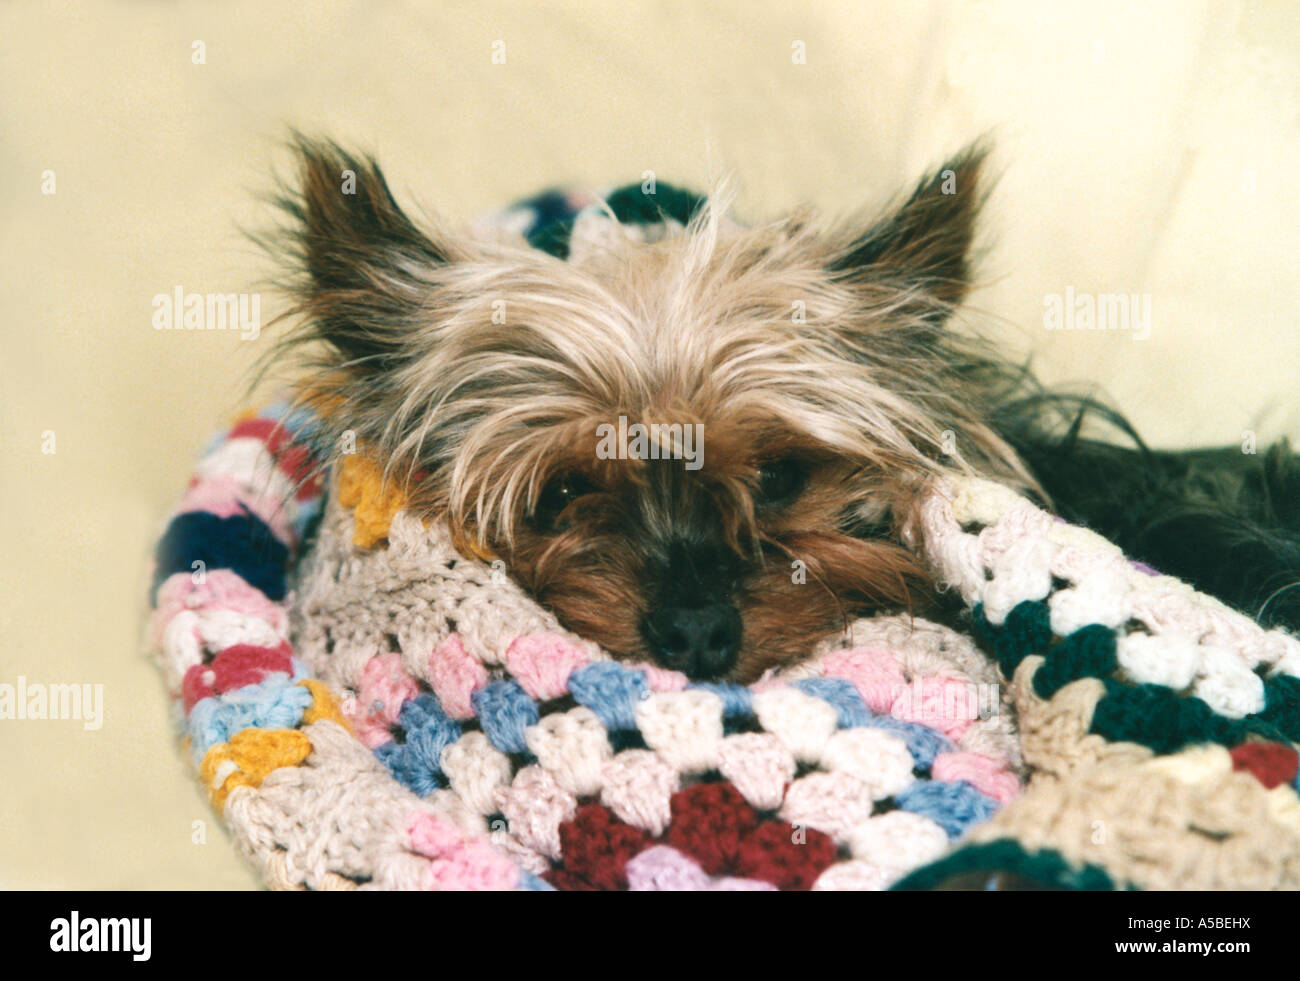 cute yorkshire terrier dog taking it easy and resting on a rug Stock Photo